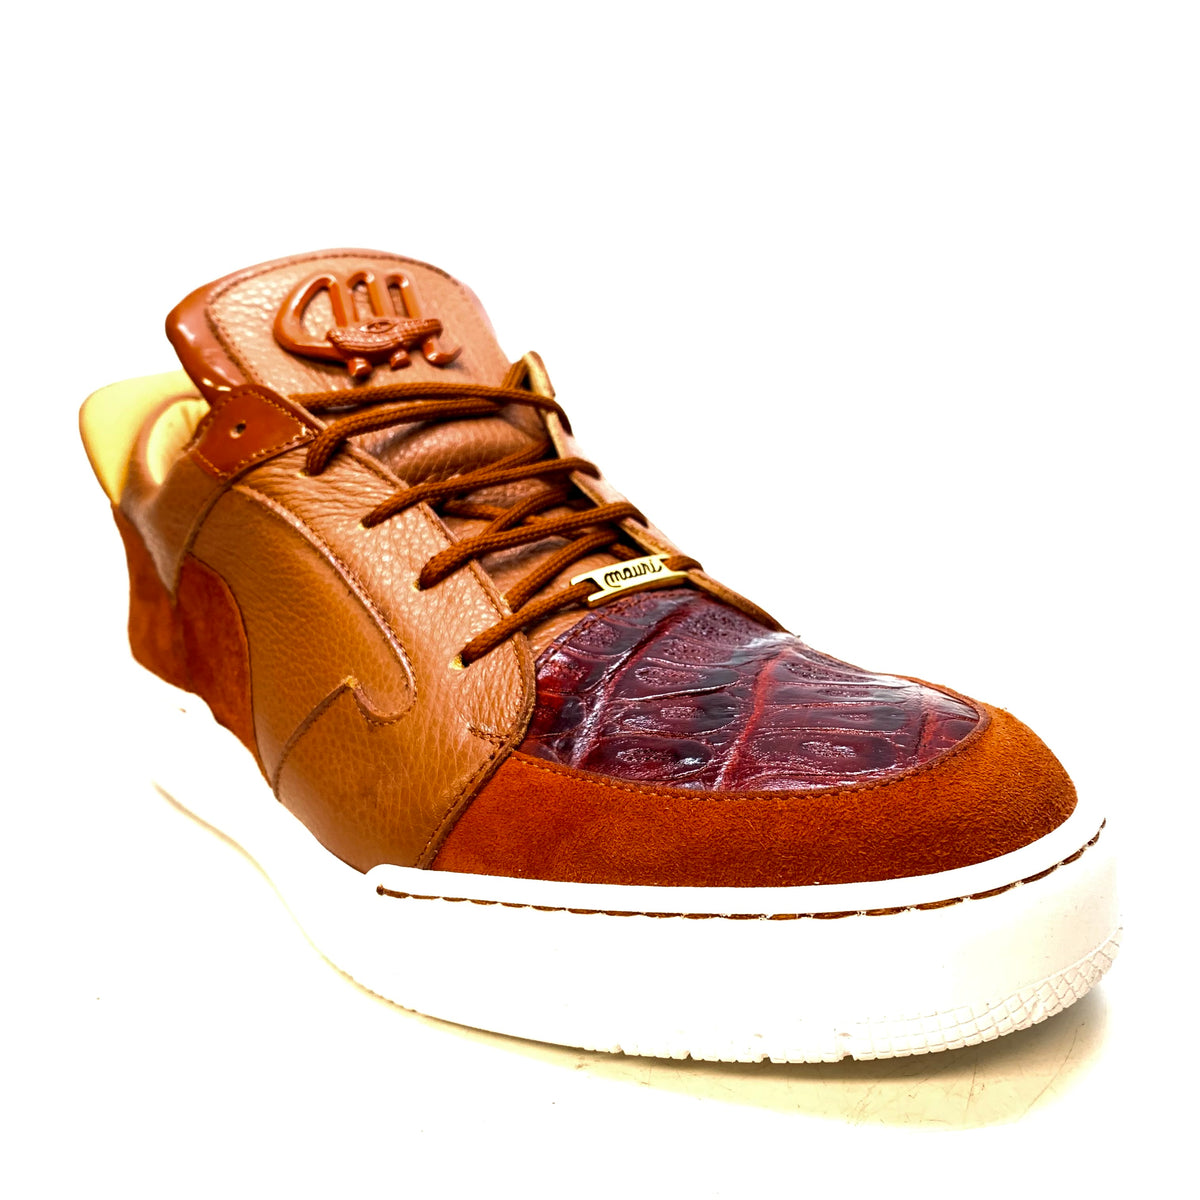 Mauri '8412' Two Tone Brown Alligator/Suede/Patent Leather Low Top Sneakers - Dudes Boutique